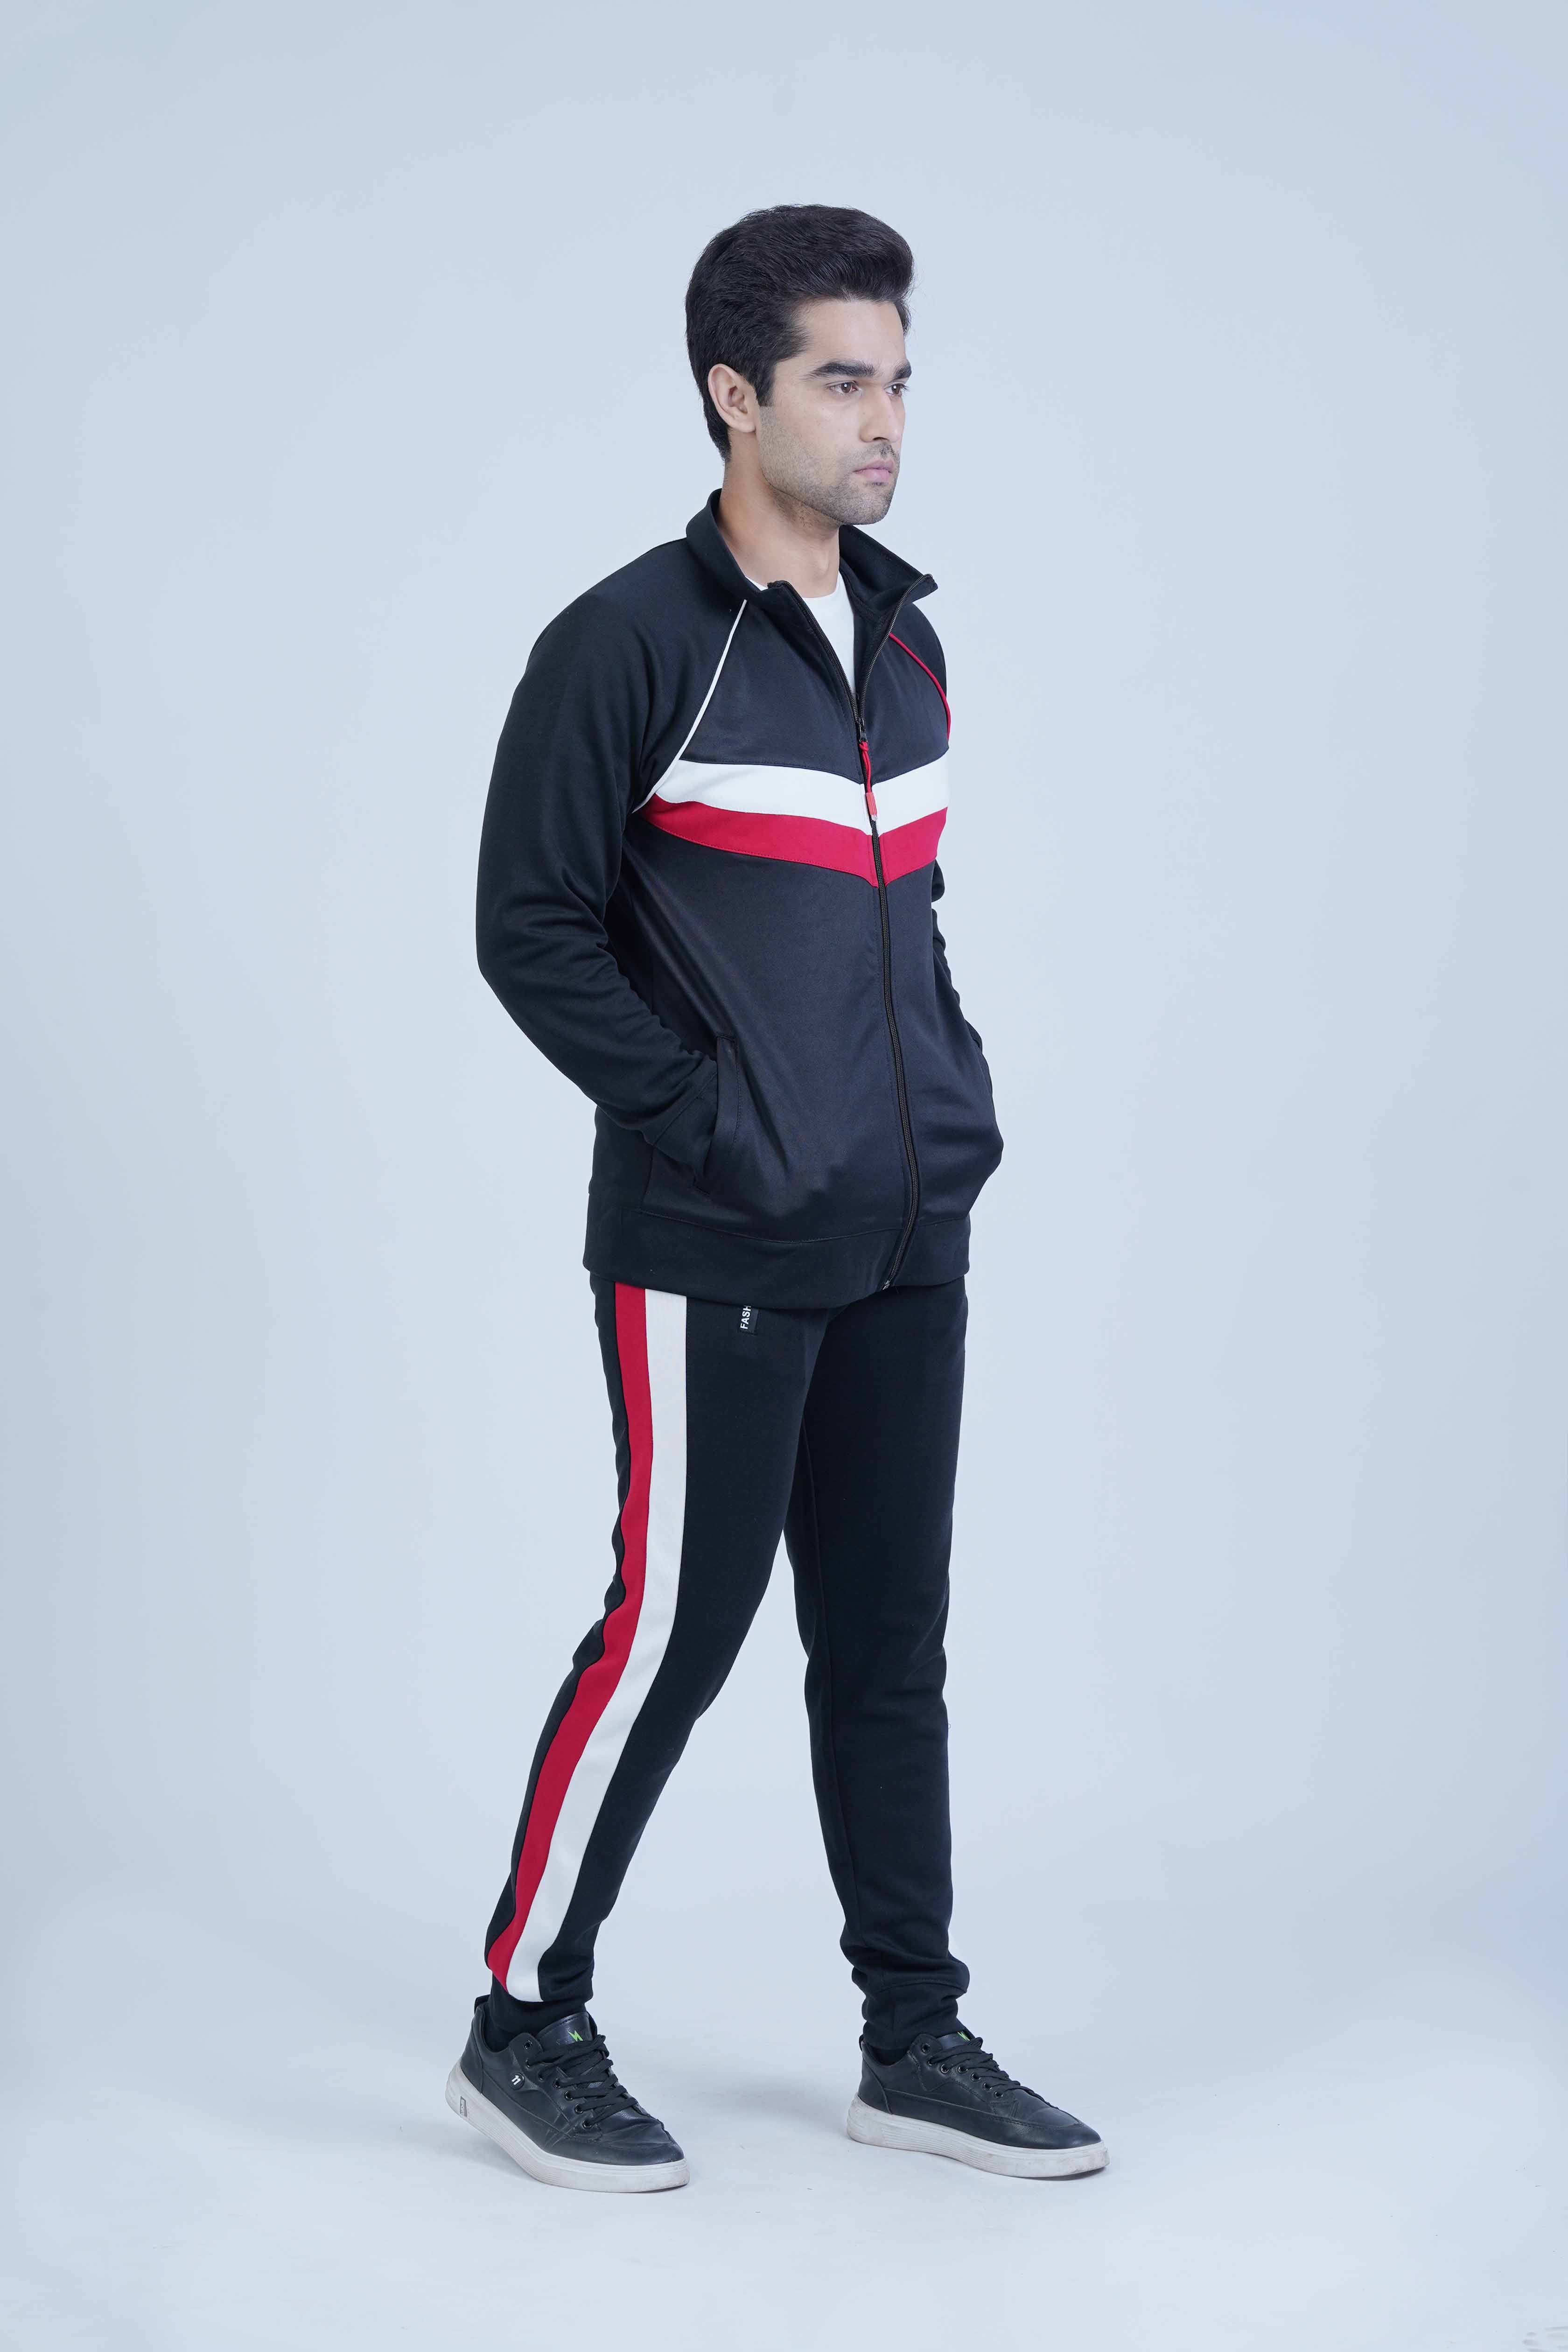  The Xea Men's Edition Pro 1.5 Tracksuit - Your Go-To Activewear"